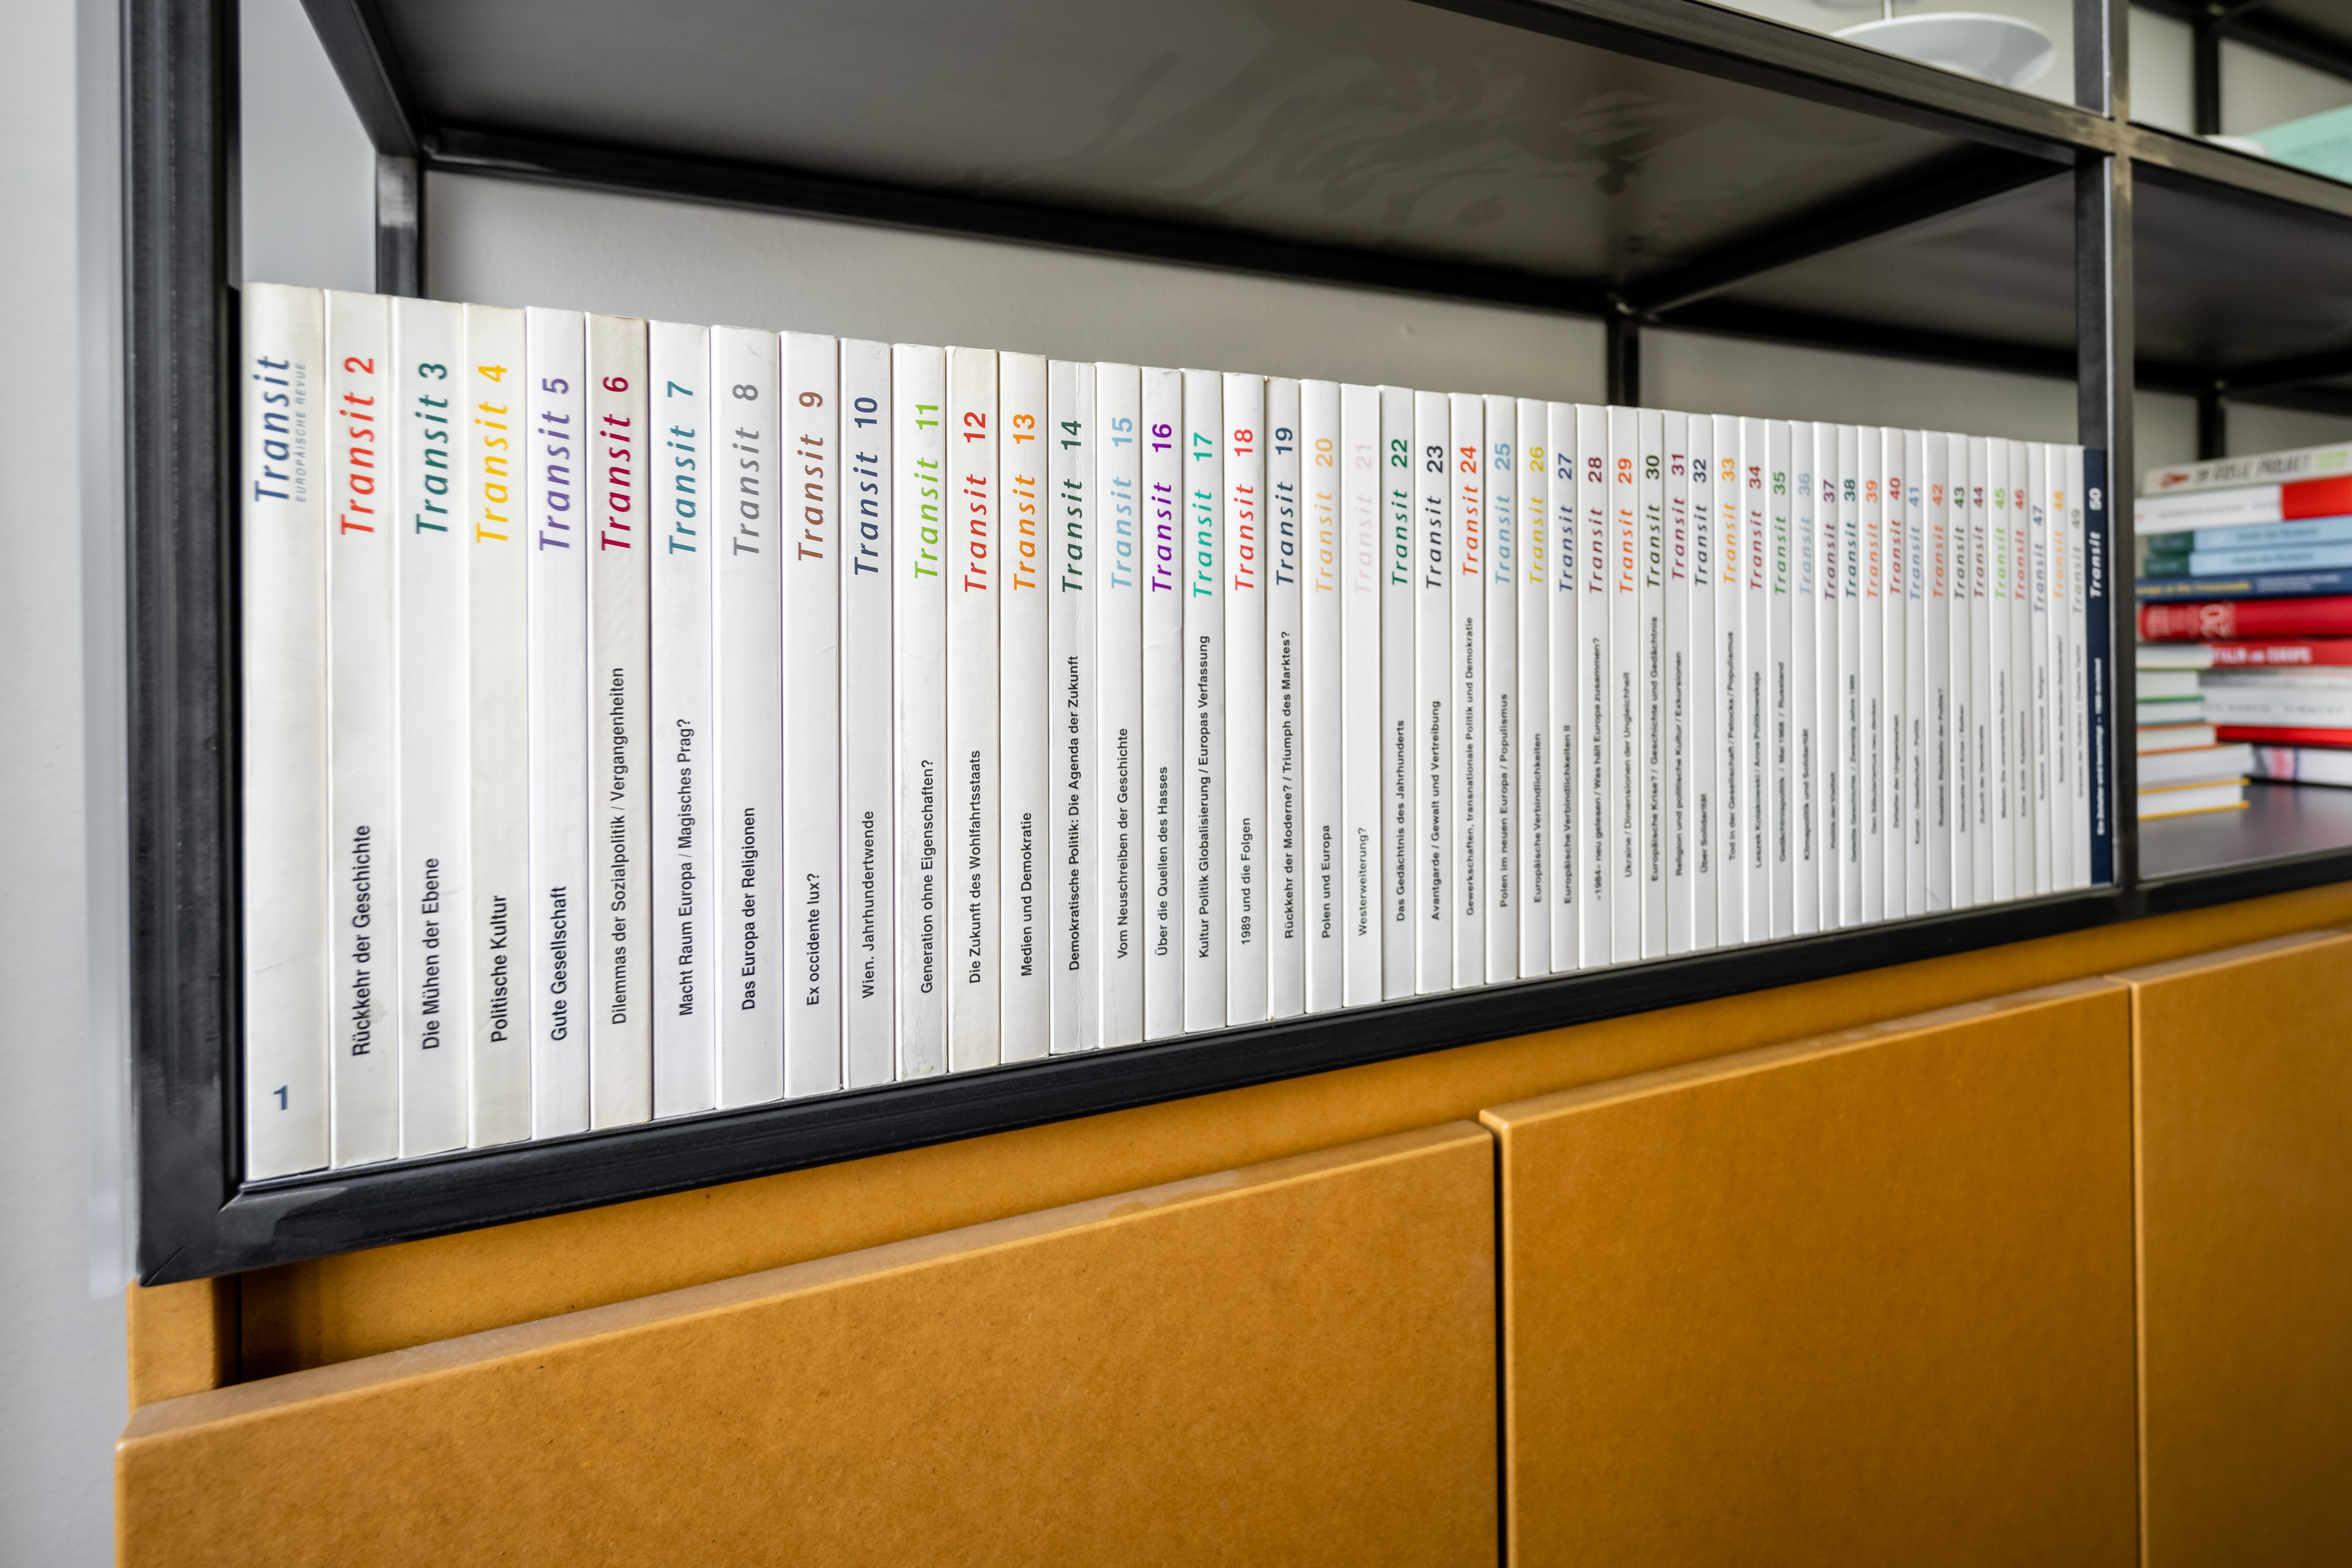 All 50 Transit issues lines up on a shelf